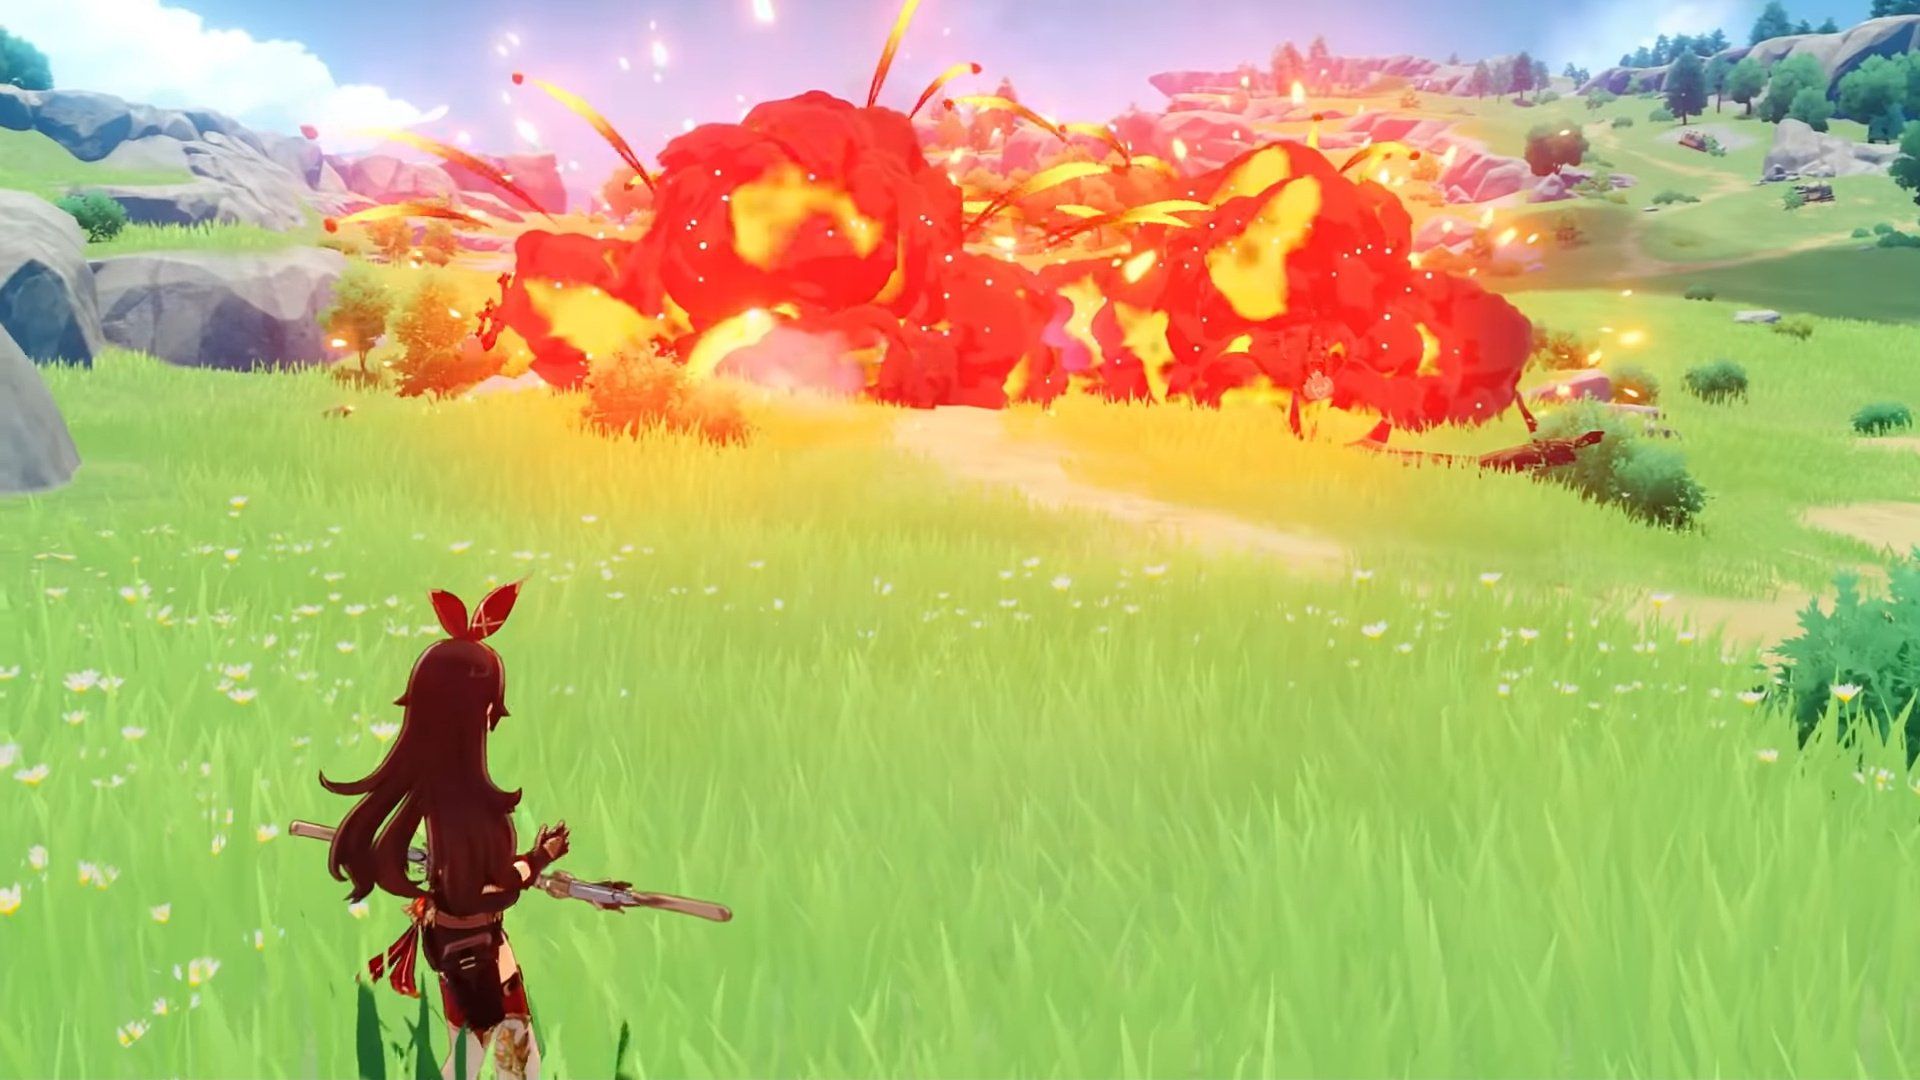 Genshin Impact Dev Responds To Breath Of The Wild Clone Comments, Insists It's A Very Different Experience